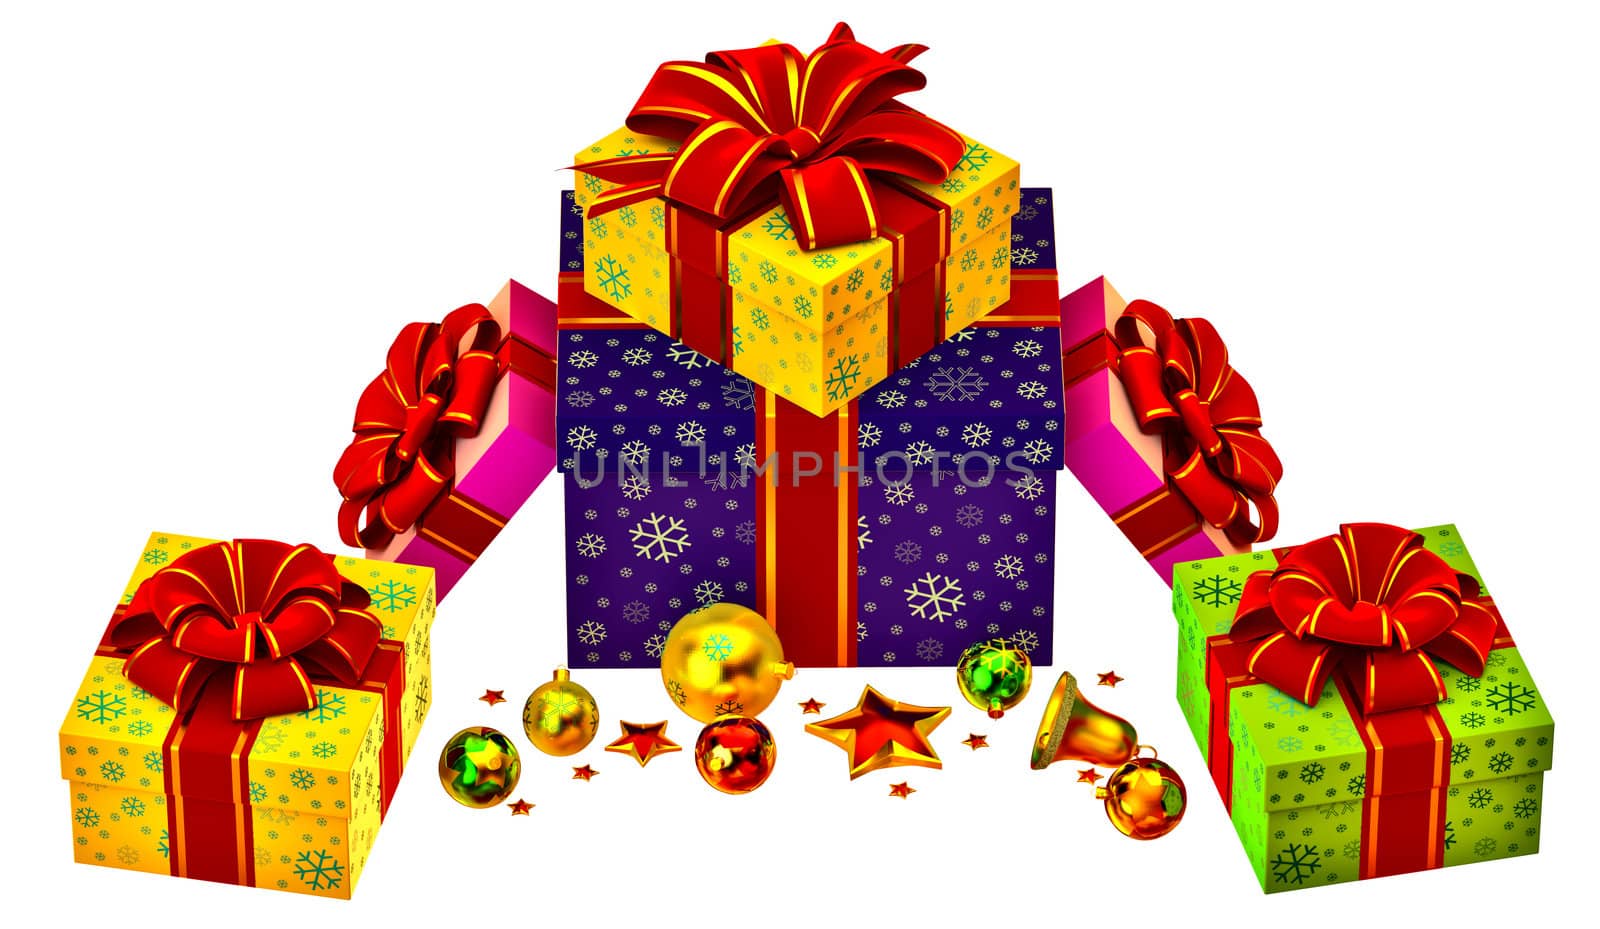 Christmas tree toys and set of pink, yellow, green and blue boxes ornamented with the snowflakes and decorated by red bows as gifts